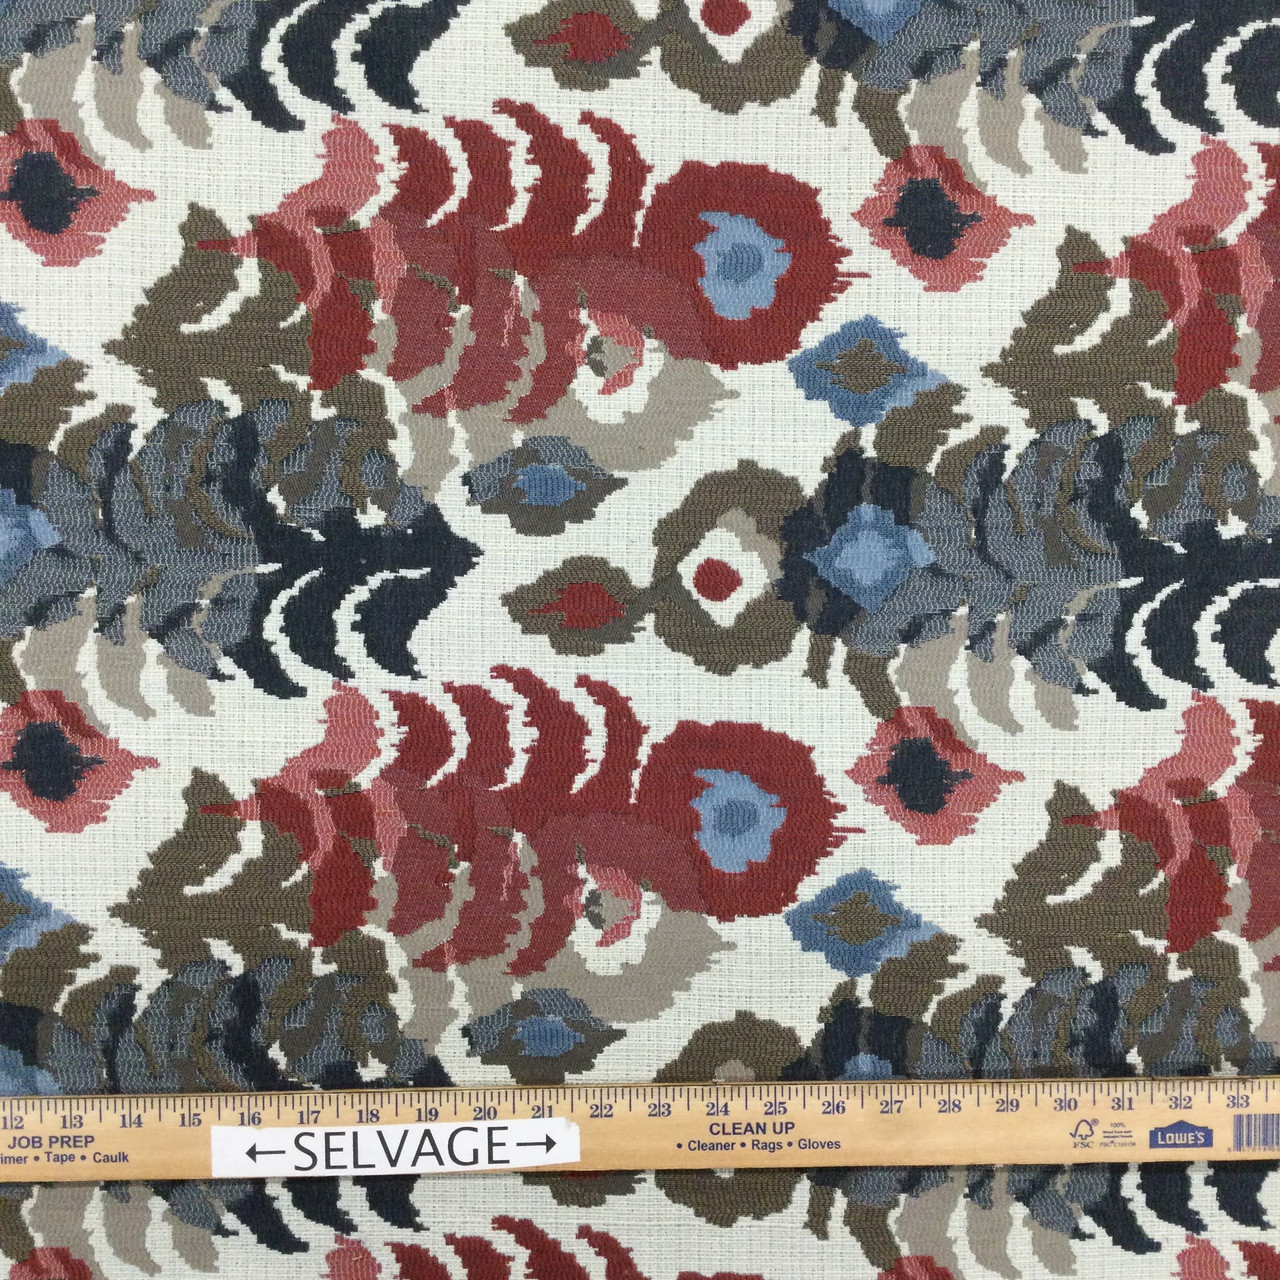 Ikat Design Jacquard Fabric | Red / Blue / Taupe / Off White | Heavyweight Upholstery | 54" Wide | By the Yard | Robert Allen "Pashatex" Pomegranate - Fabric Warehouse